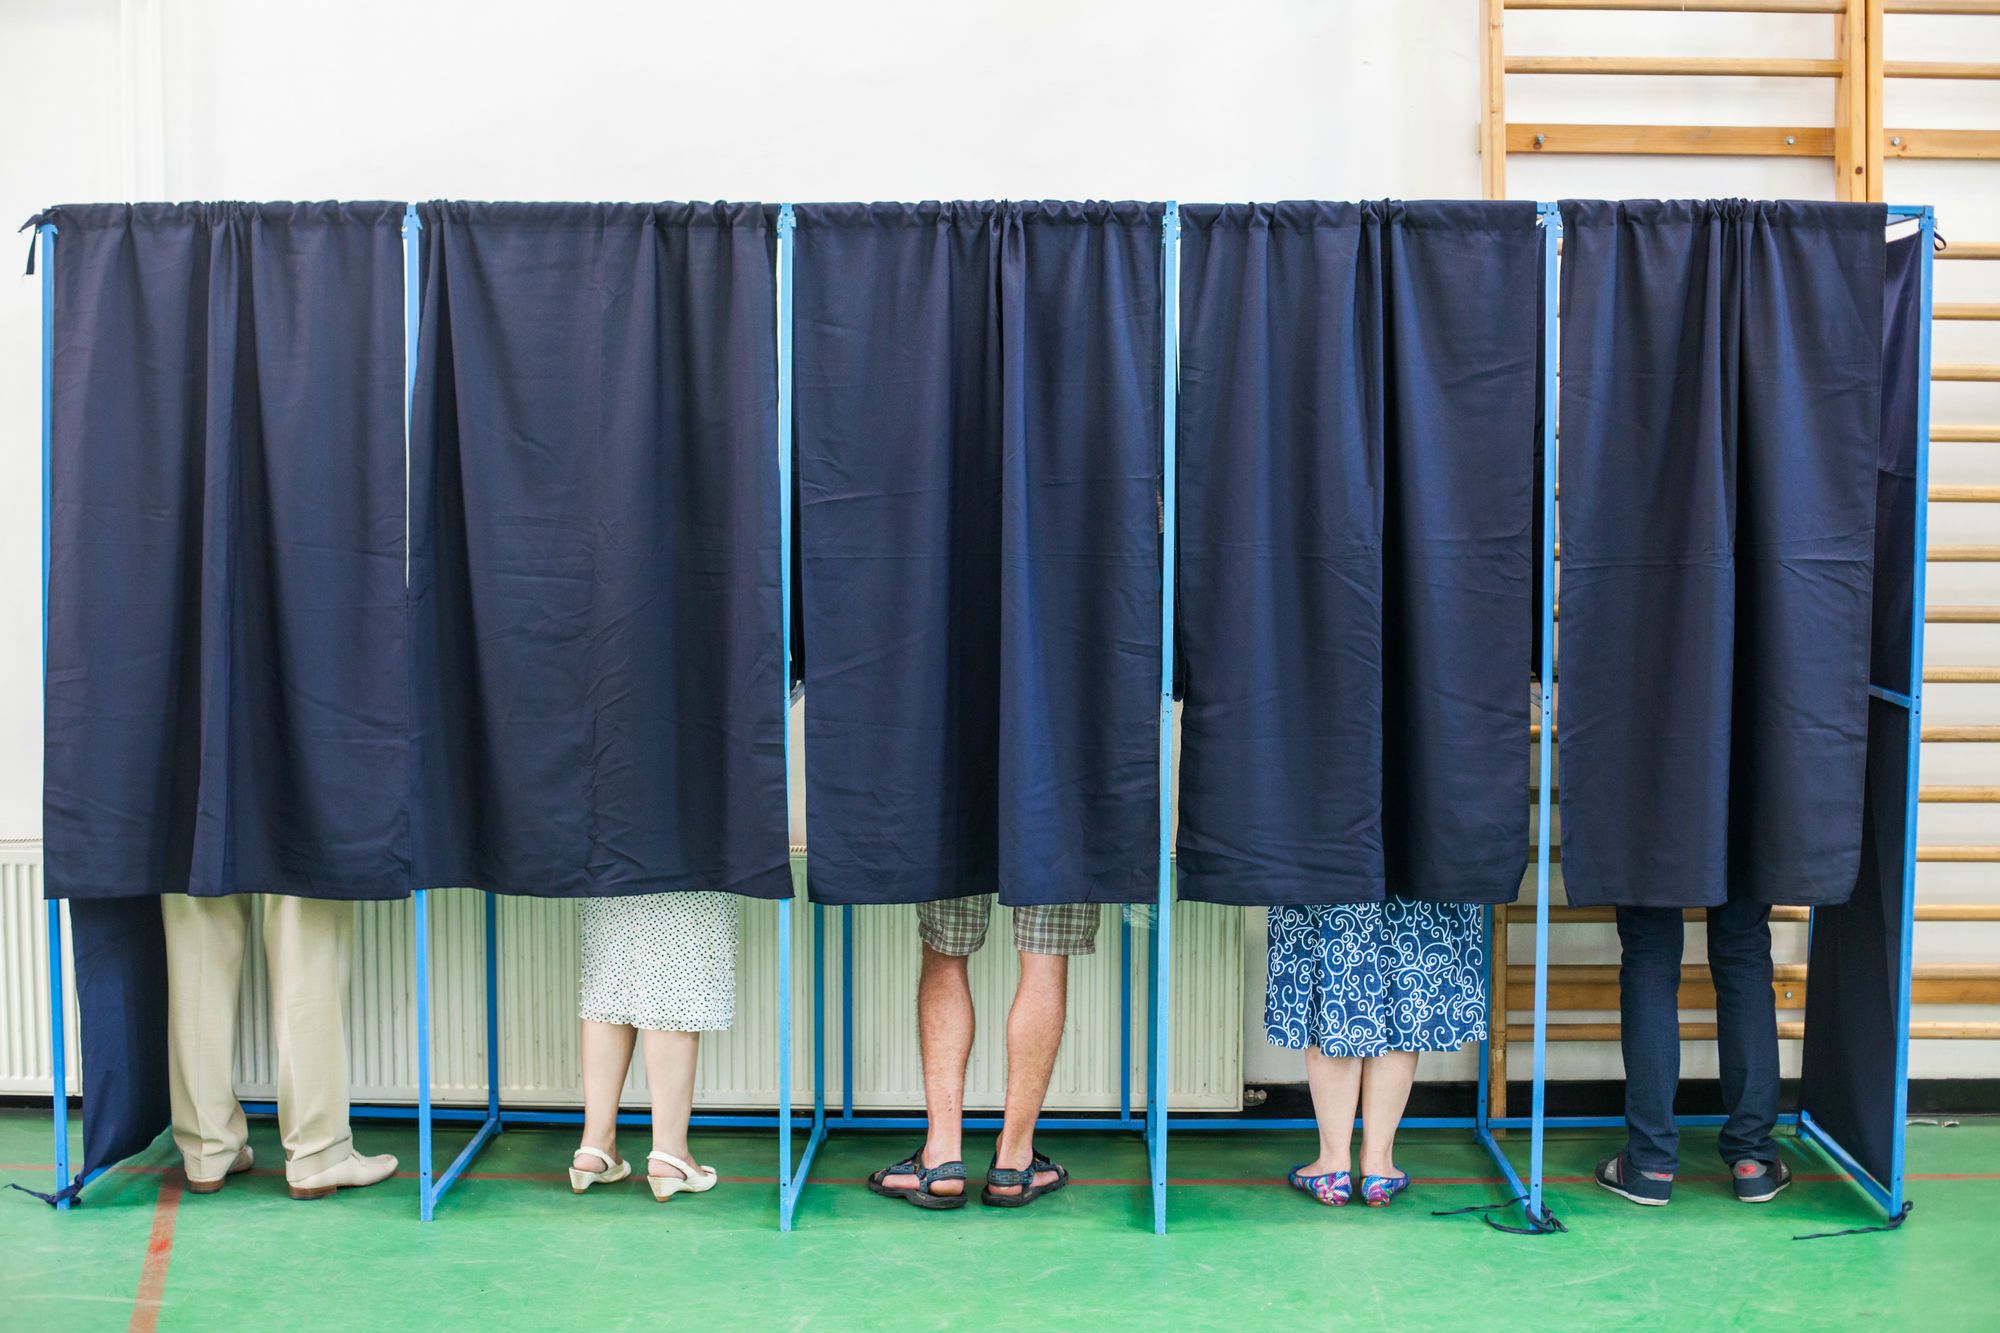 Voters in a row of voting booths